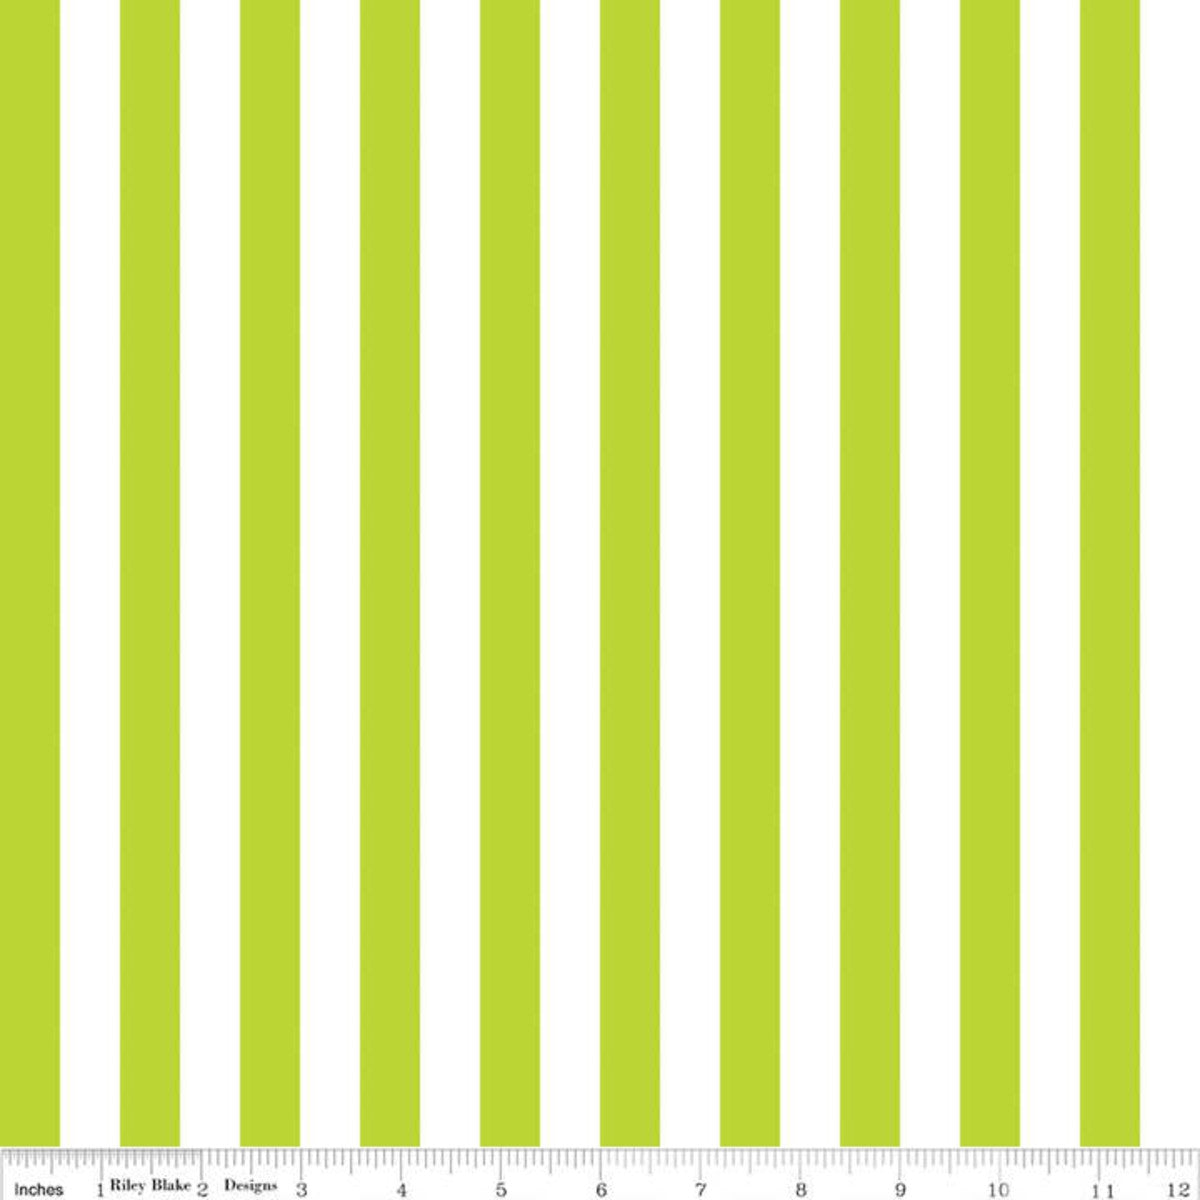 Riley Blake Designs Half Inch Lime Green and White Stripes perfect for quilt binding apparel or home decor projects cotton material fabric  